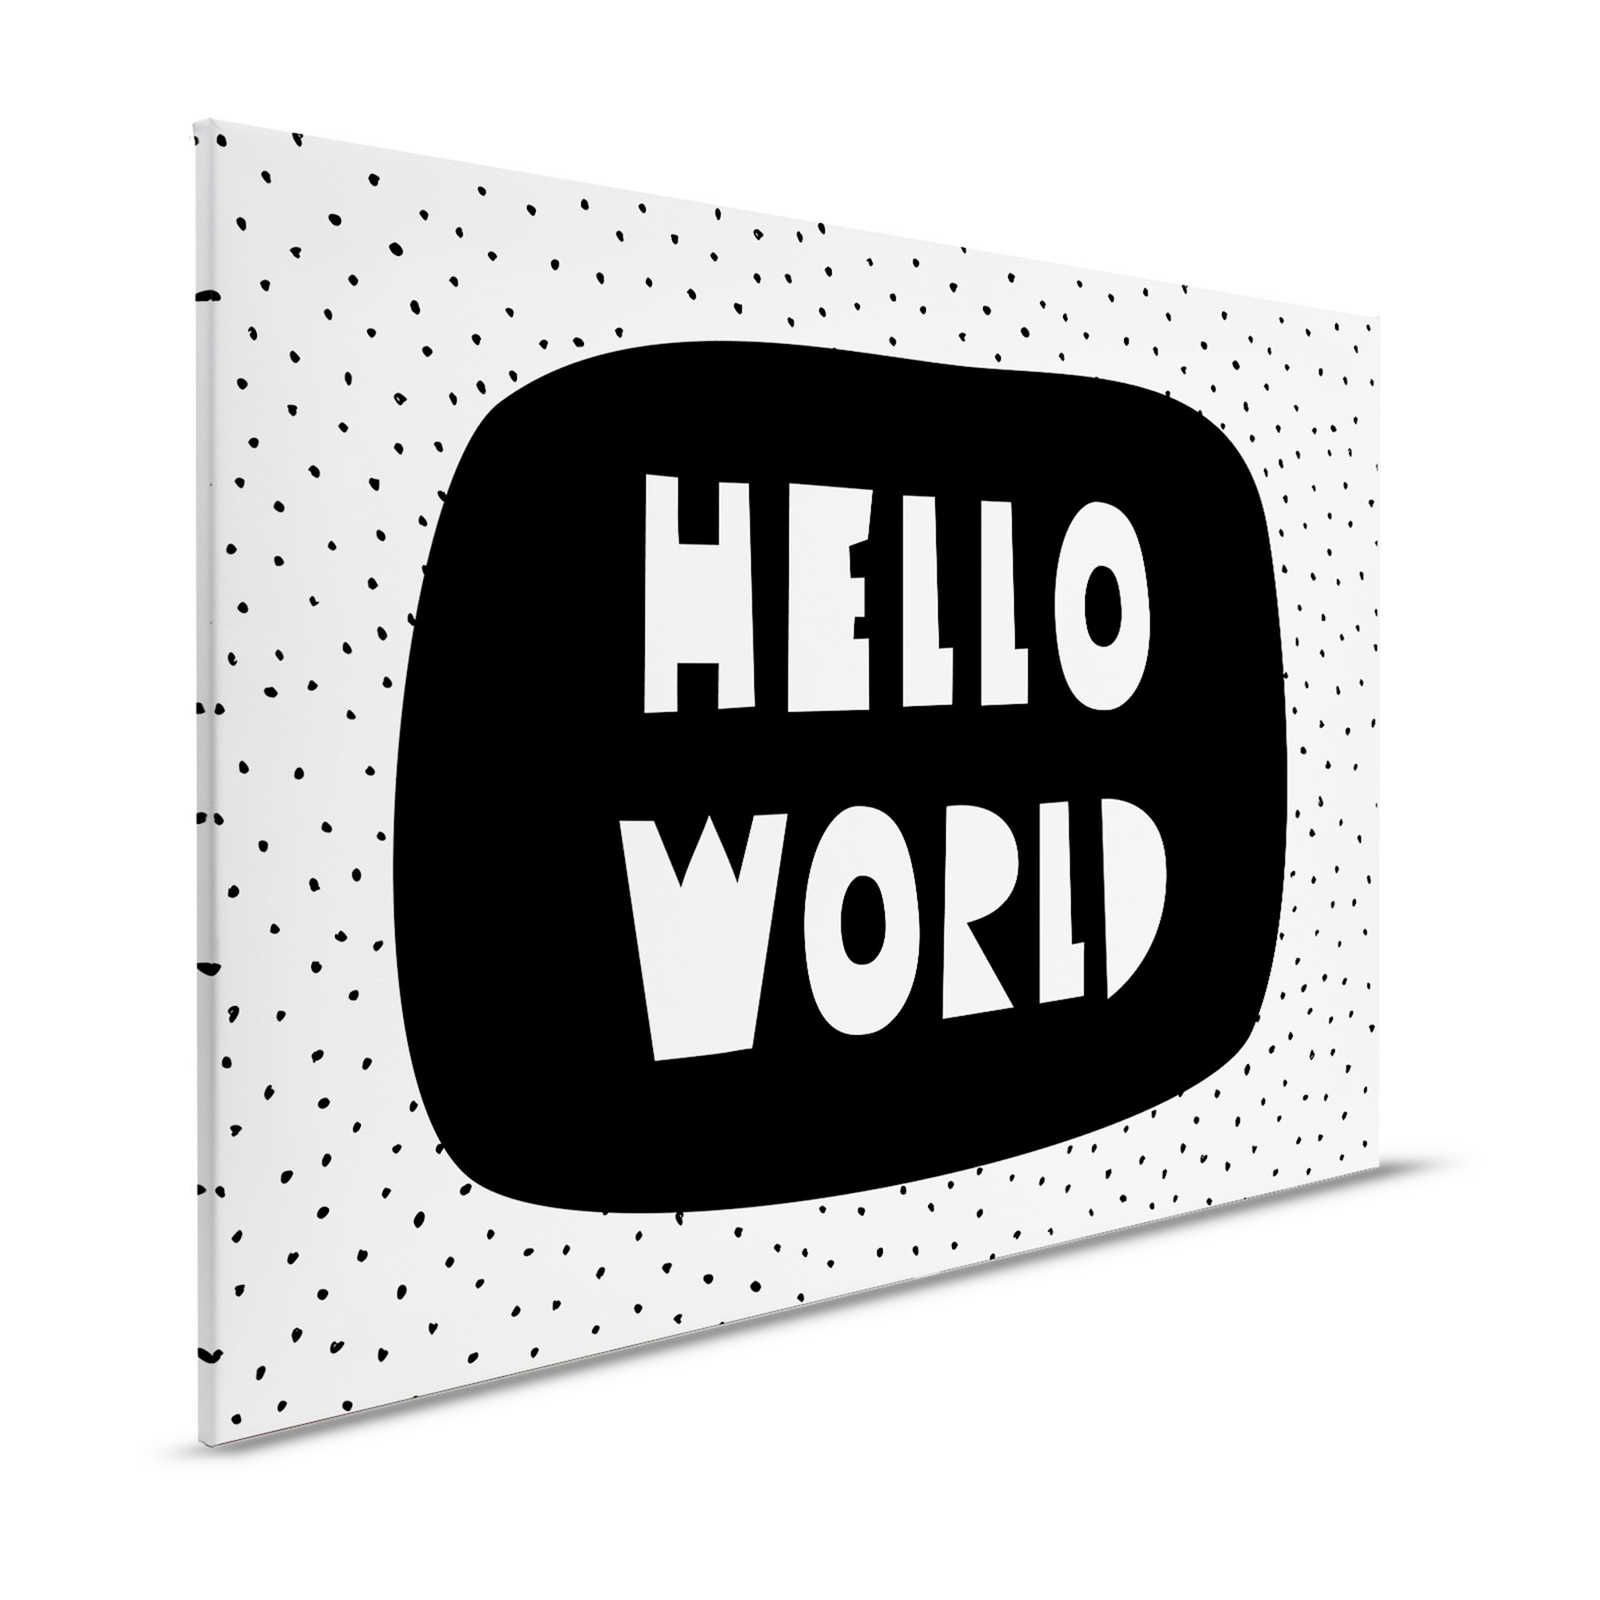 Canvas for children's room with lettering "Hello World" - 120 cm x 80 cm
